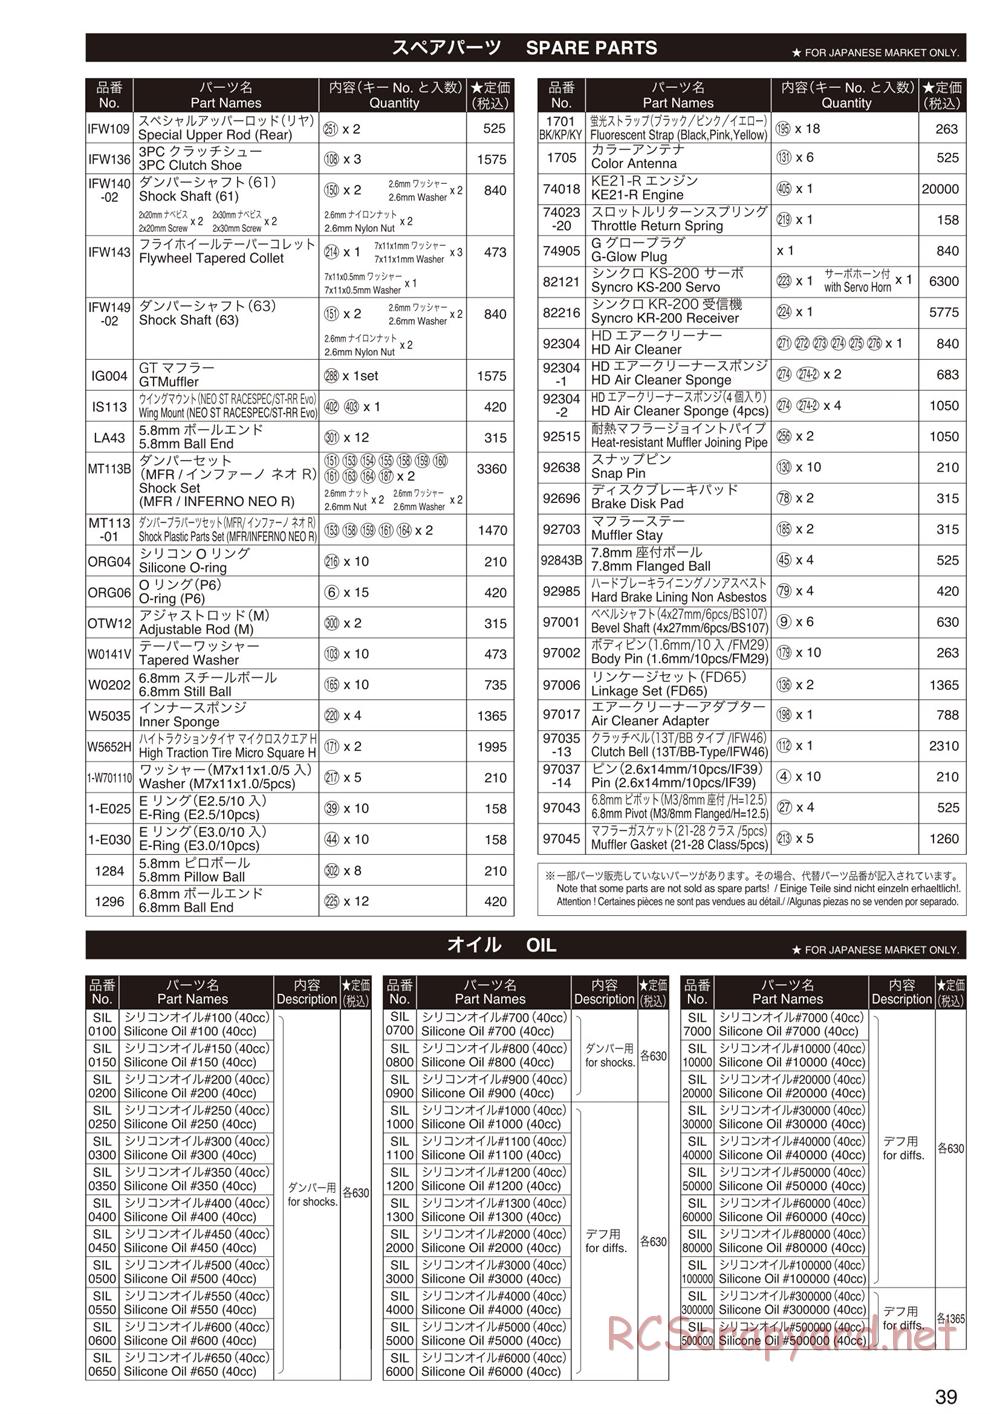 Kyosho - Inferno Neo 2.0 - Parts List - Page 2